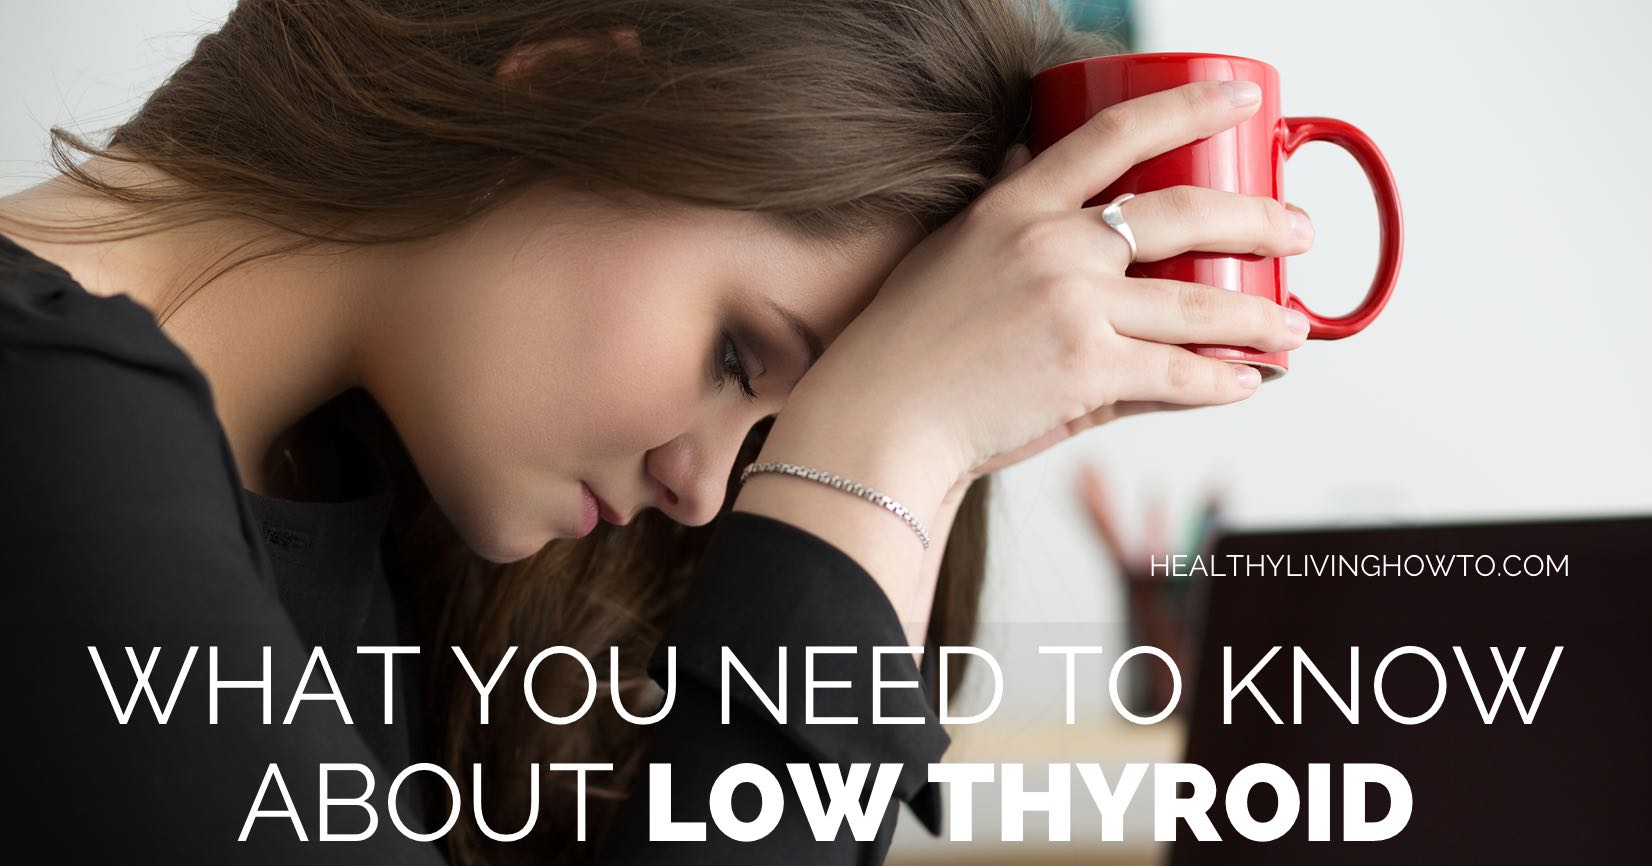 What You Need to Know About Low Thyroid | healthylivinghowto.com